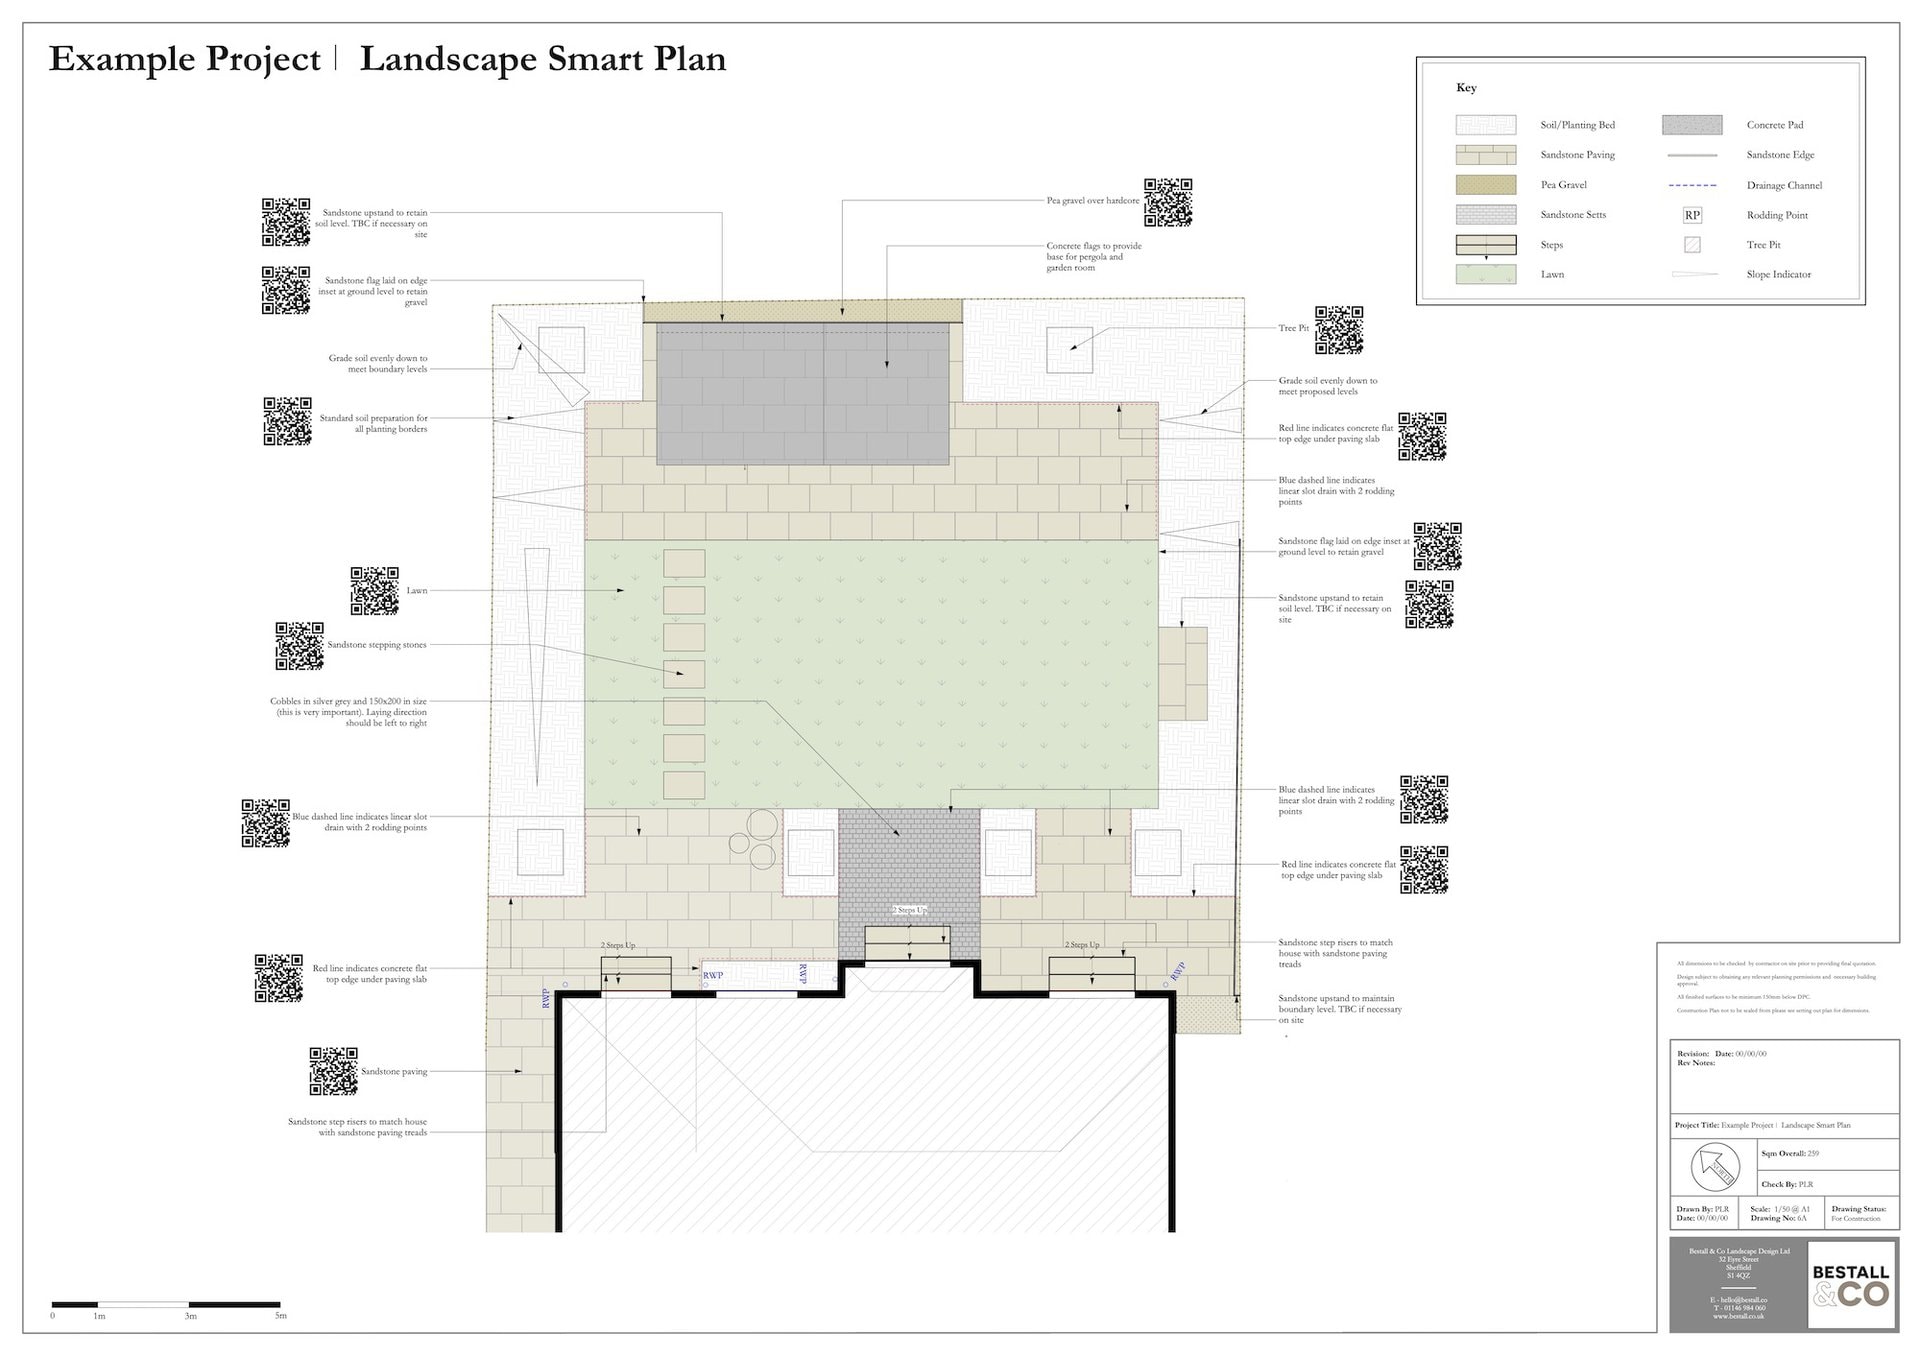 Example Project Landscape Smart Plan LOWRES